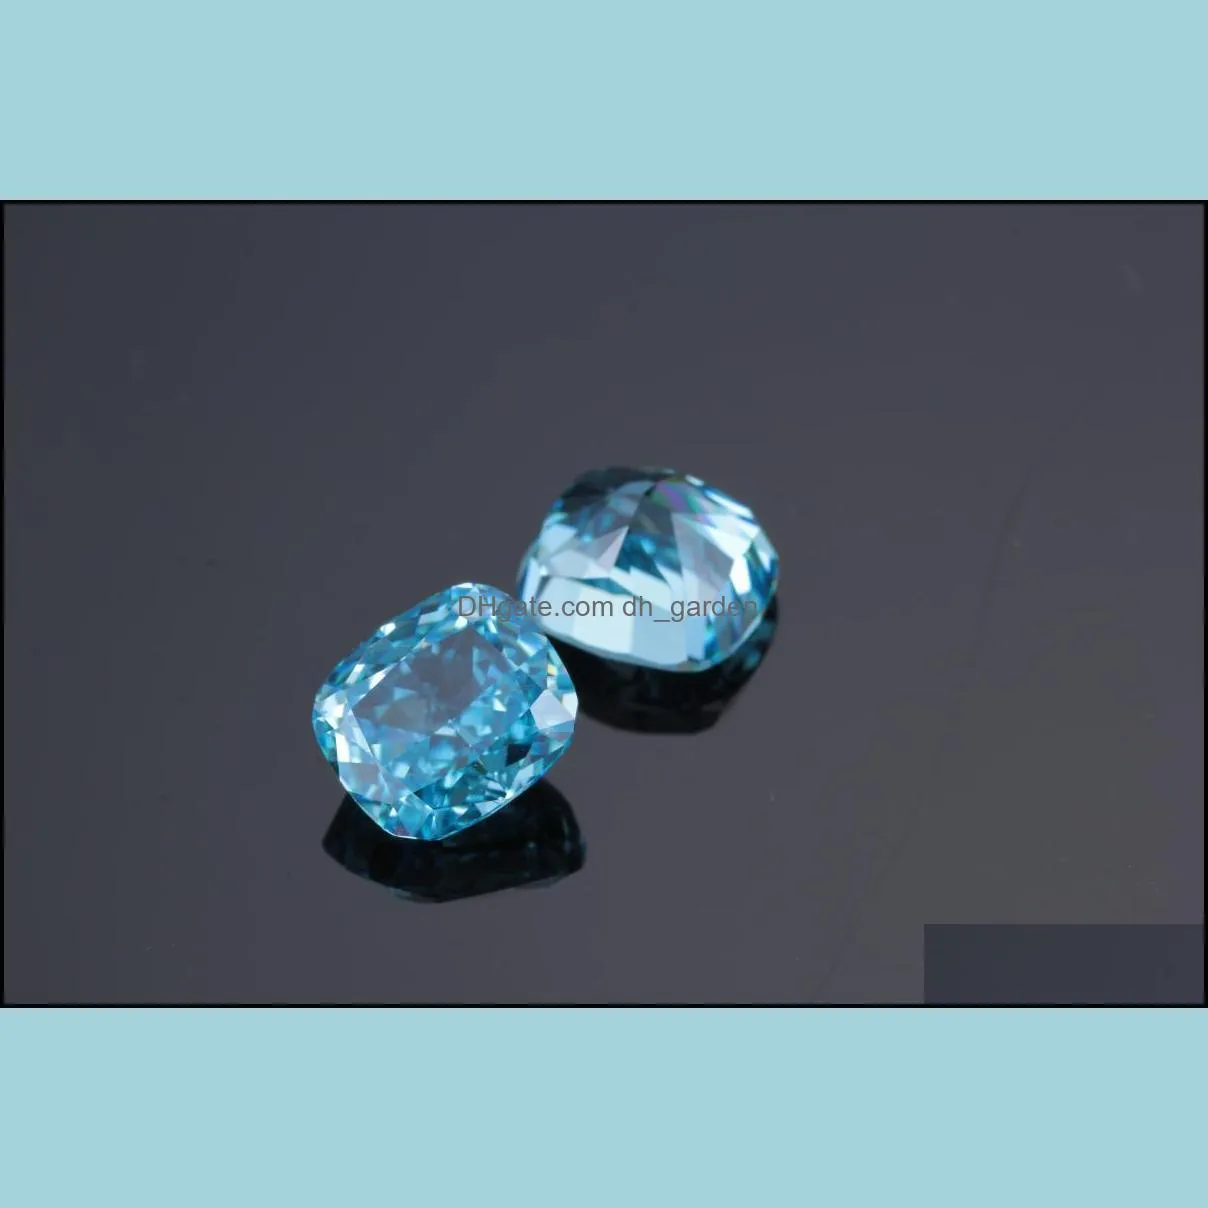 other zhanhao wholesale radiant cut loose gemstone for diamond jewelry making simulant blue zirconother brit22